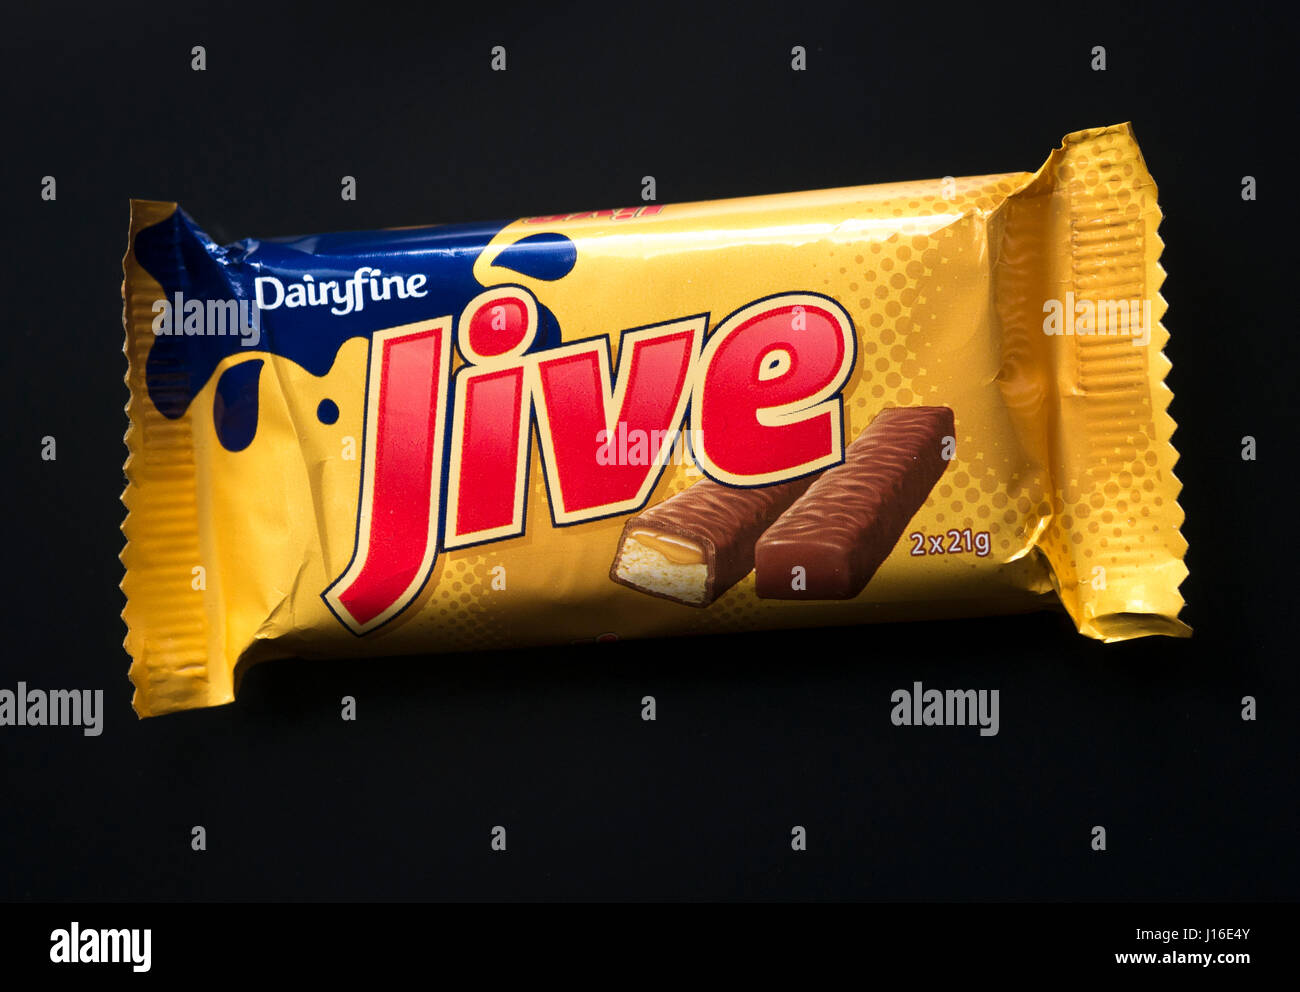 Jive Caramel Shortcake Bars, Made by Dairyfine and sold by Aldi supermarkets, Looks very similar to a Twix Stock Photo